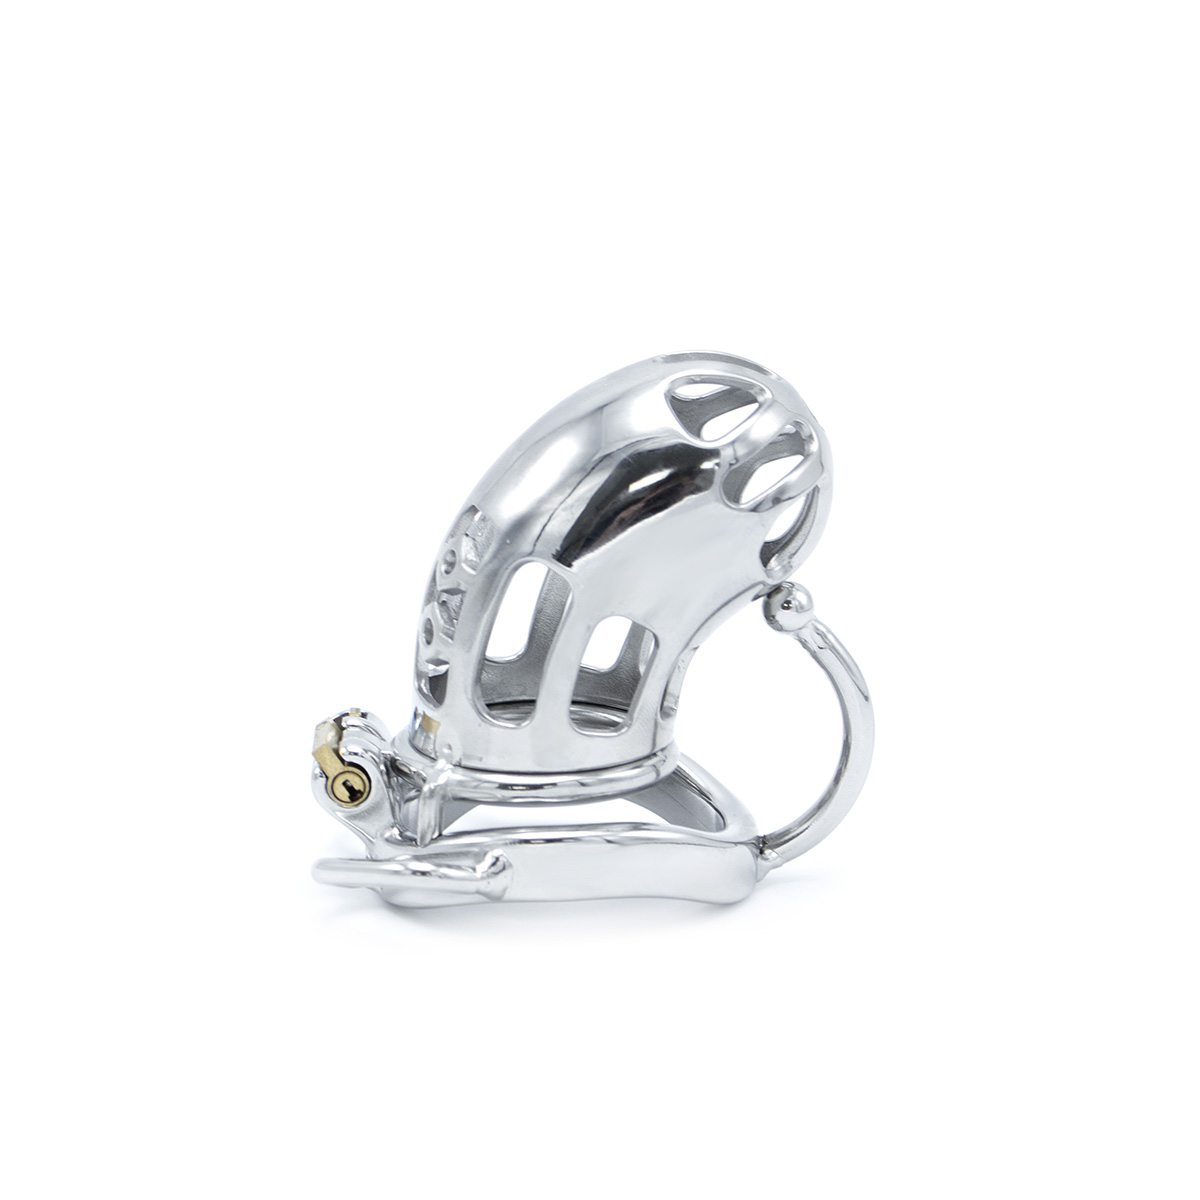 Belted-Chastity-Device-with-Ball-Divider-OPR-278014-7